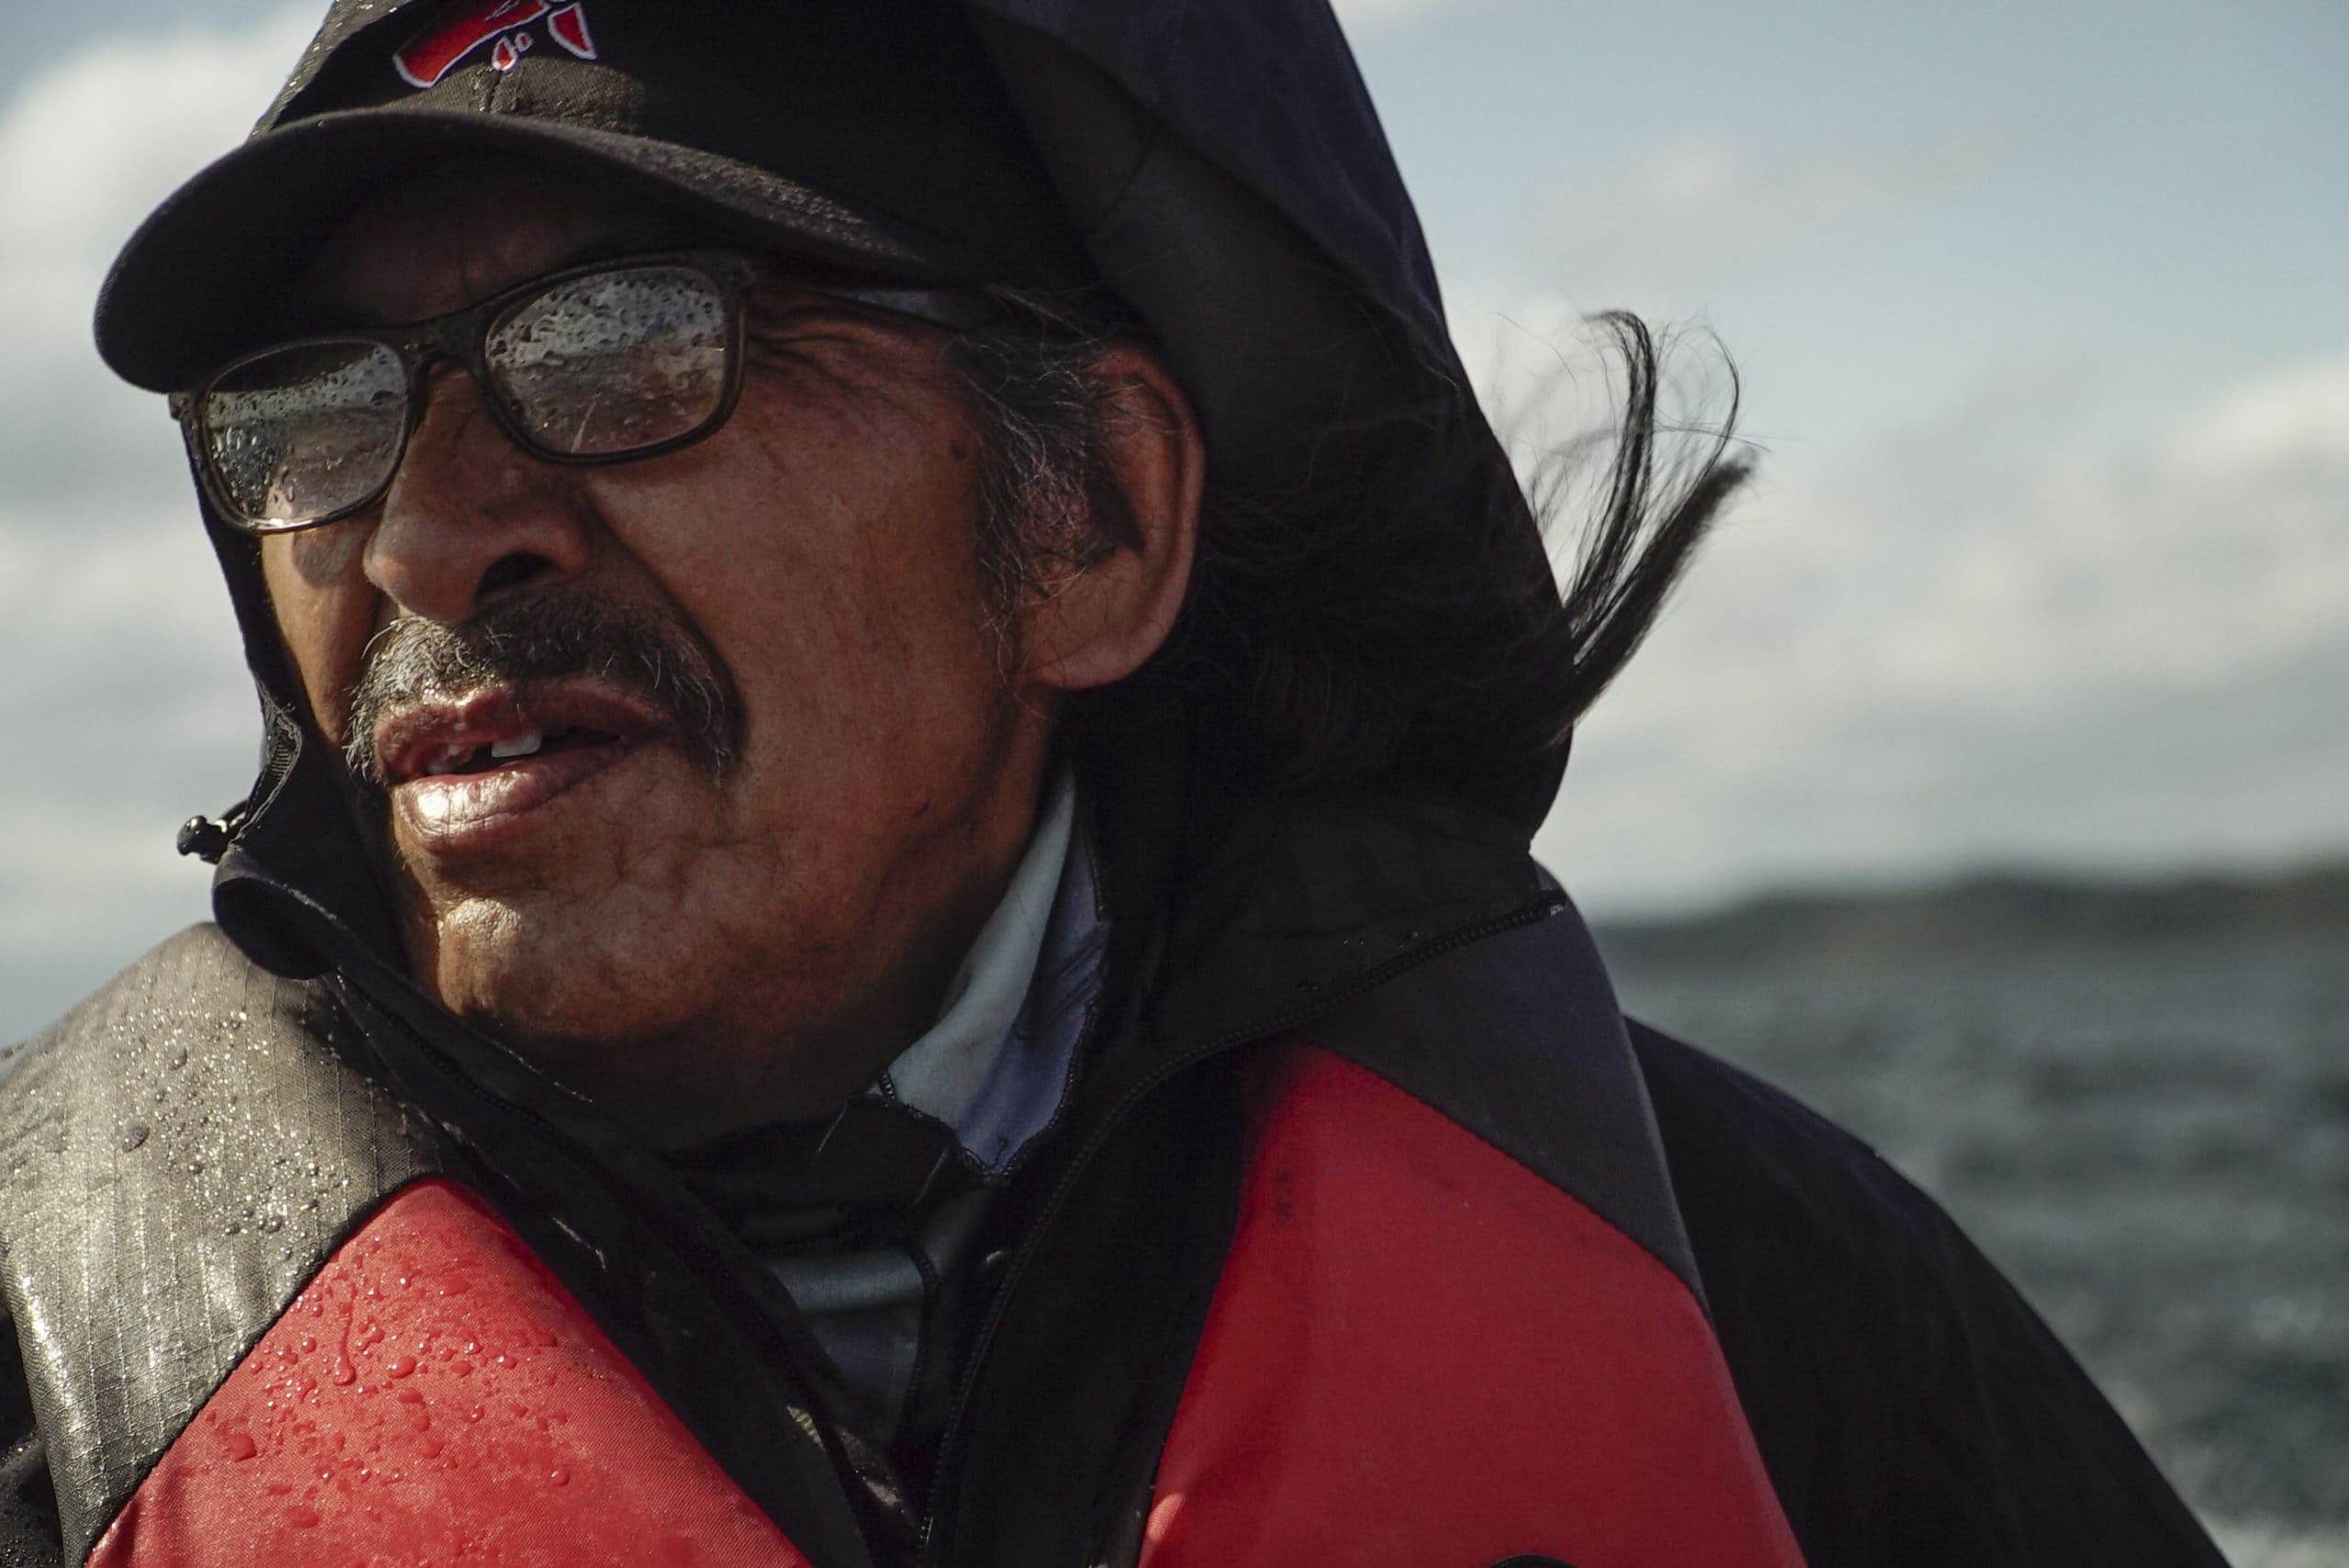 A portrait of Łutsël K’é Dene community member and Thaidene Nëné management board member, JC Catholique. JC appears to be on a boat and is wearing sunglasses, an orange life jacket and black ball cap. There is water in the background and blue skies.